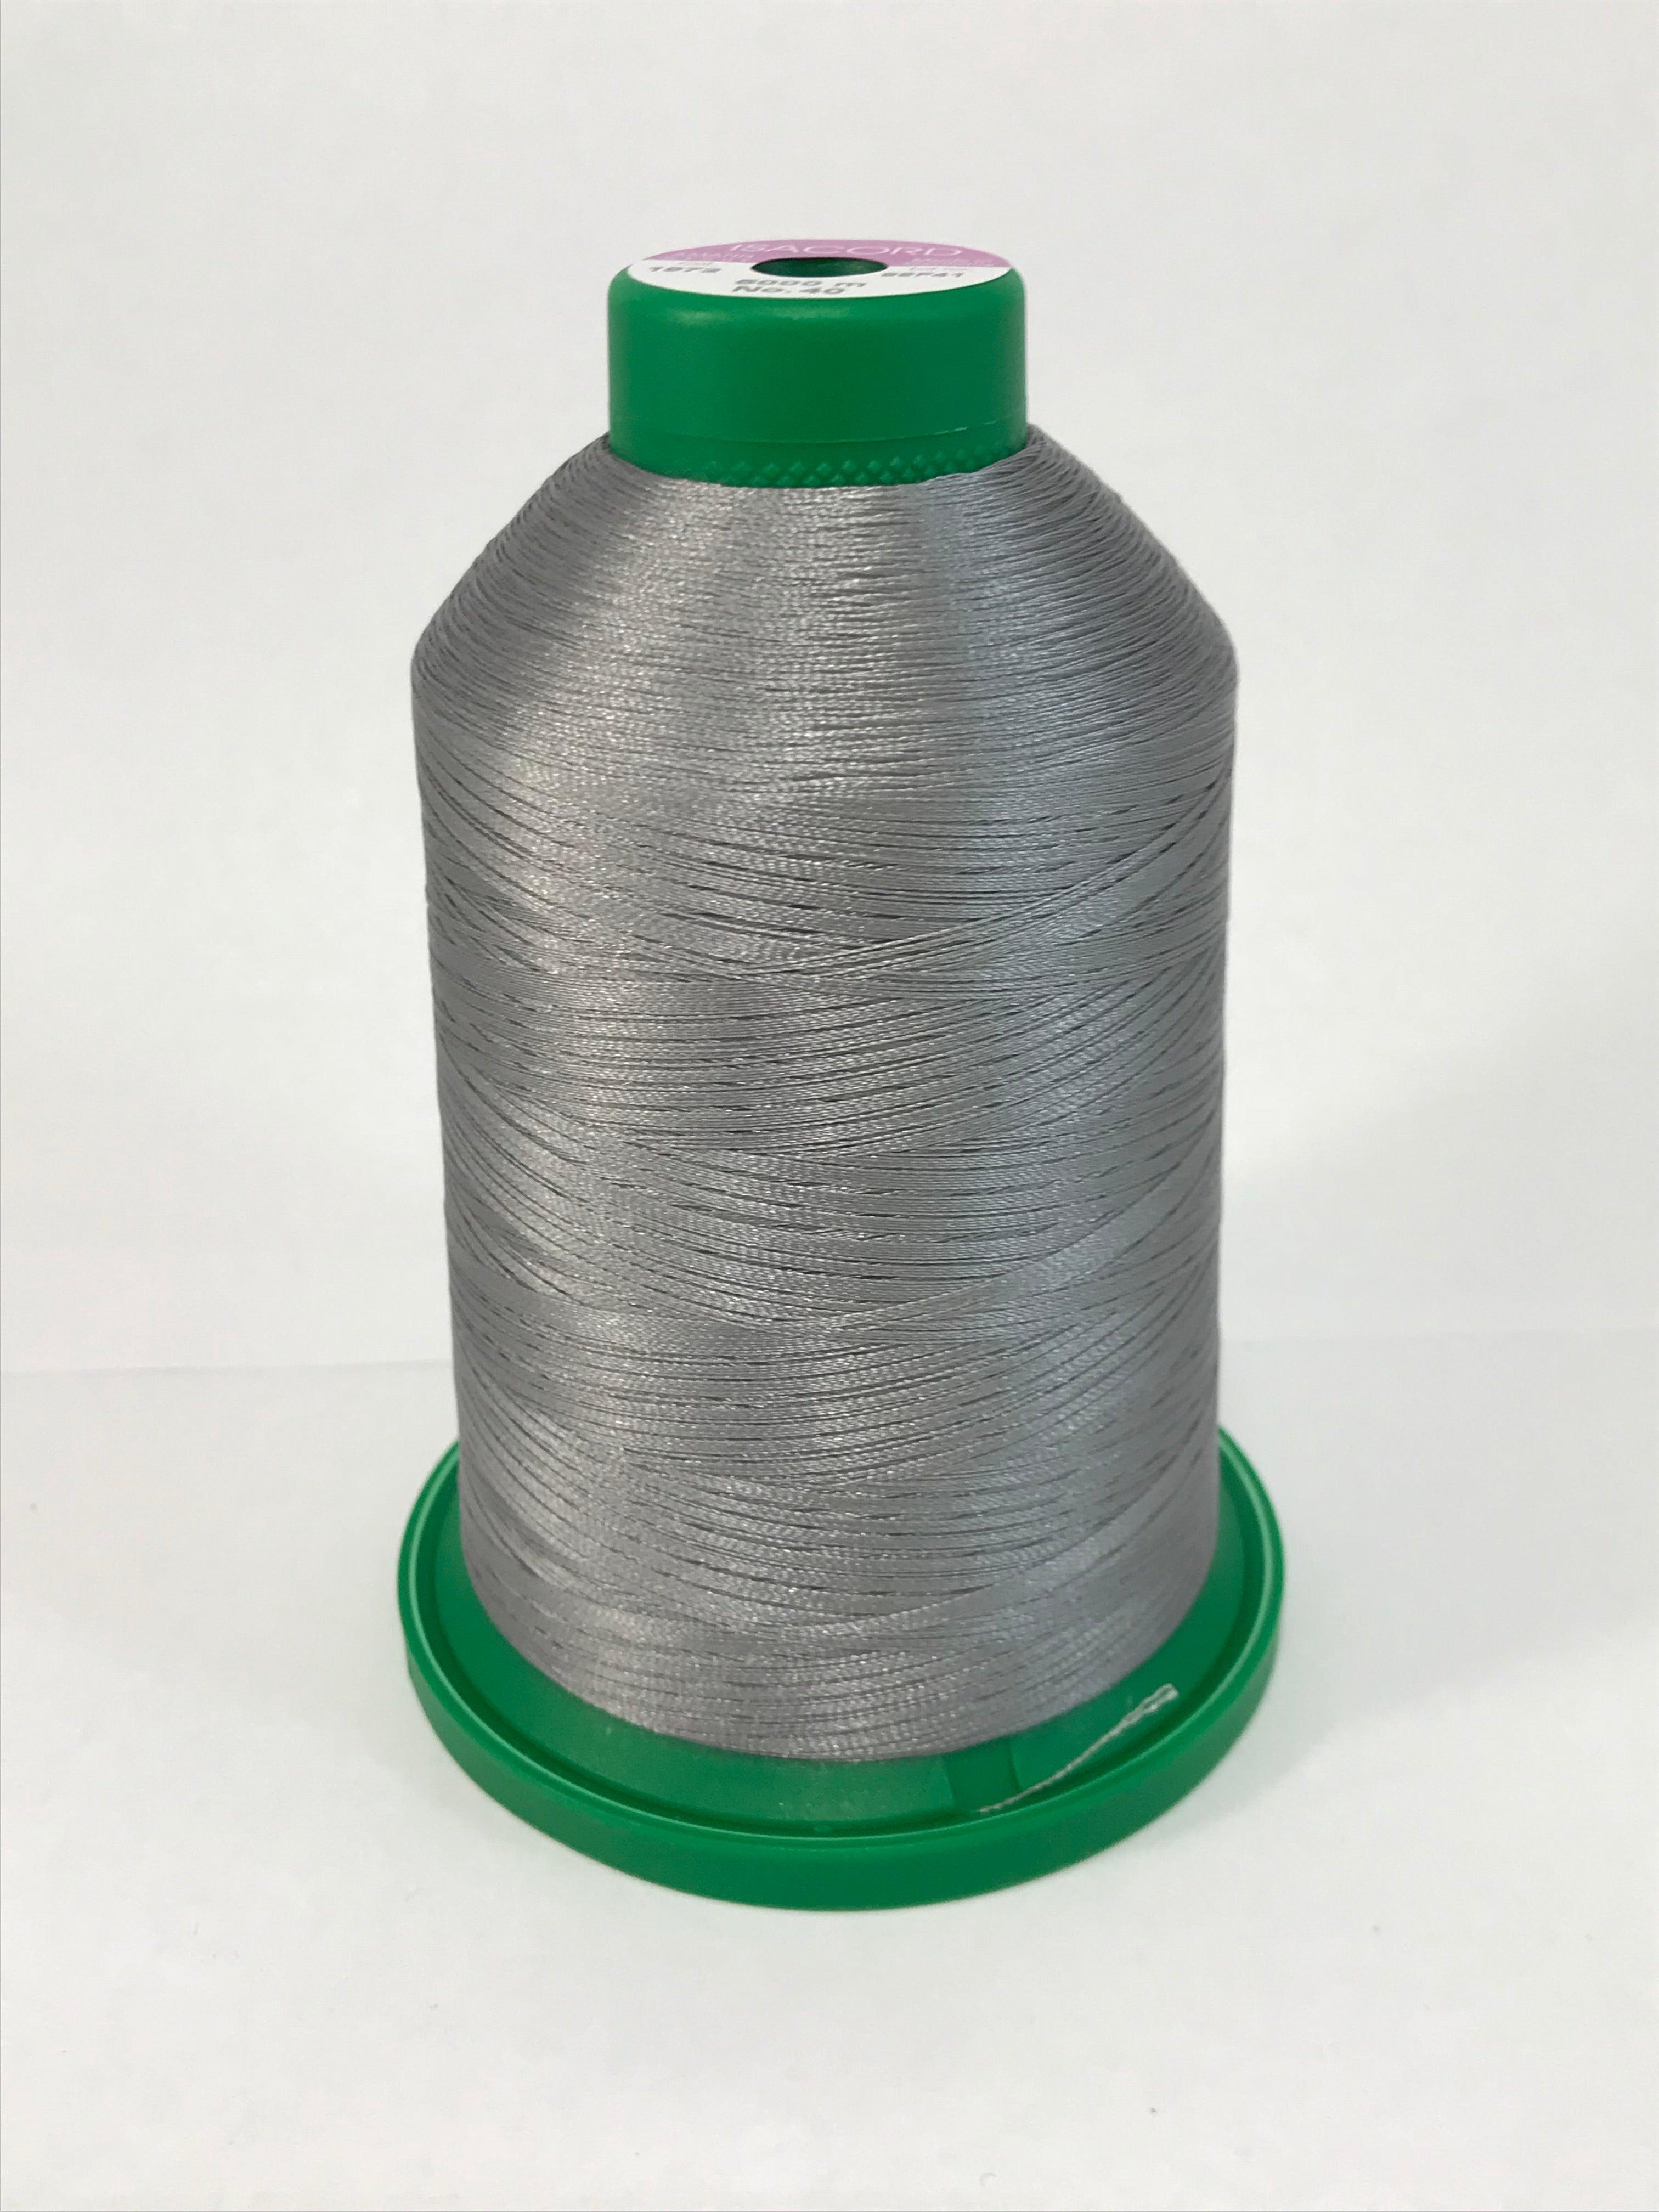 1972 -SILVERY GRAY -ISACORD EMBROIDERY THREAD 40 WT